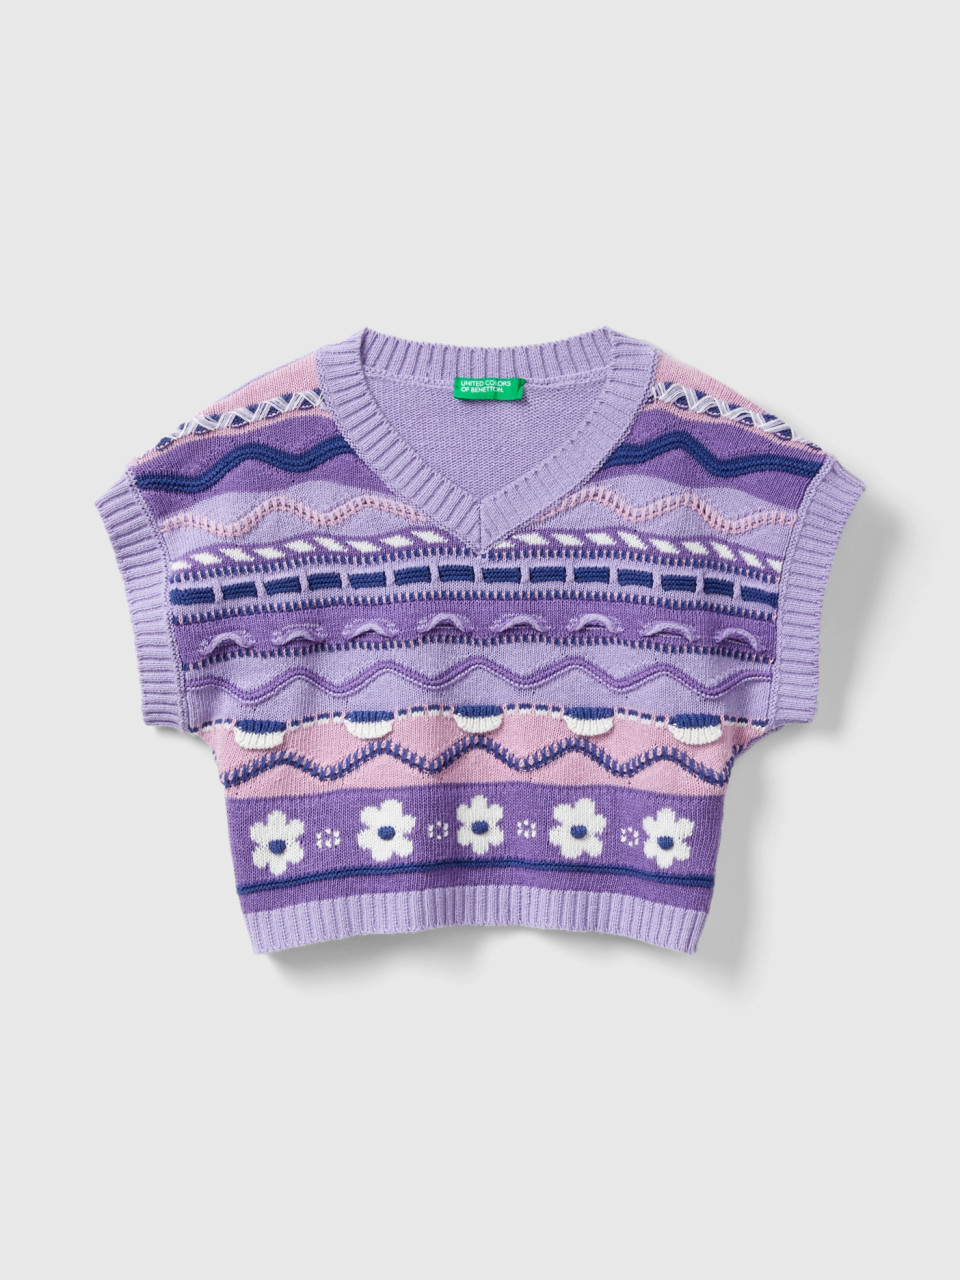 Benetton, Jacquard Vest In Recycled Cotton Blend, Lilac, Kids